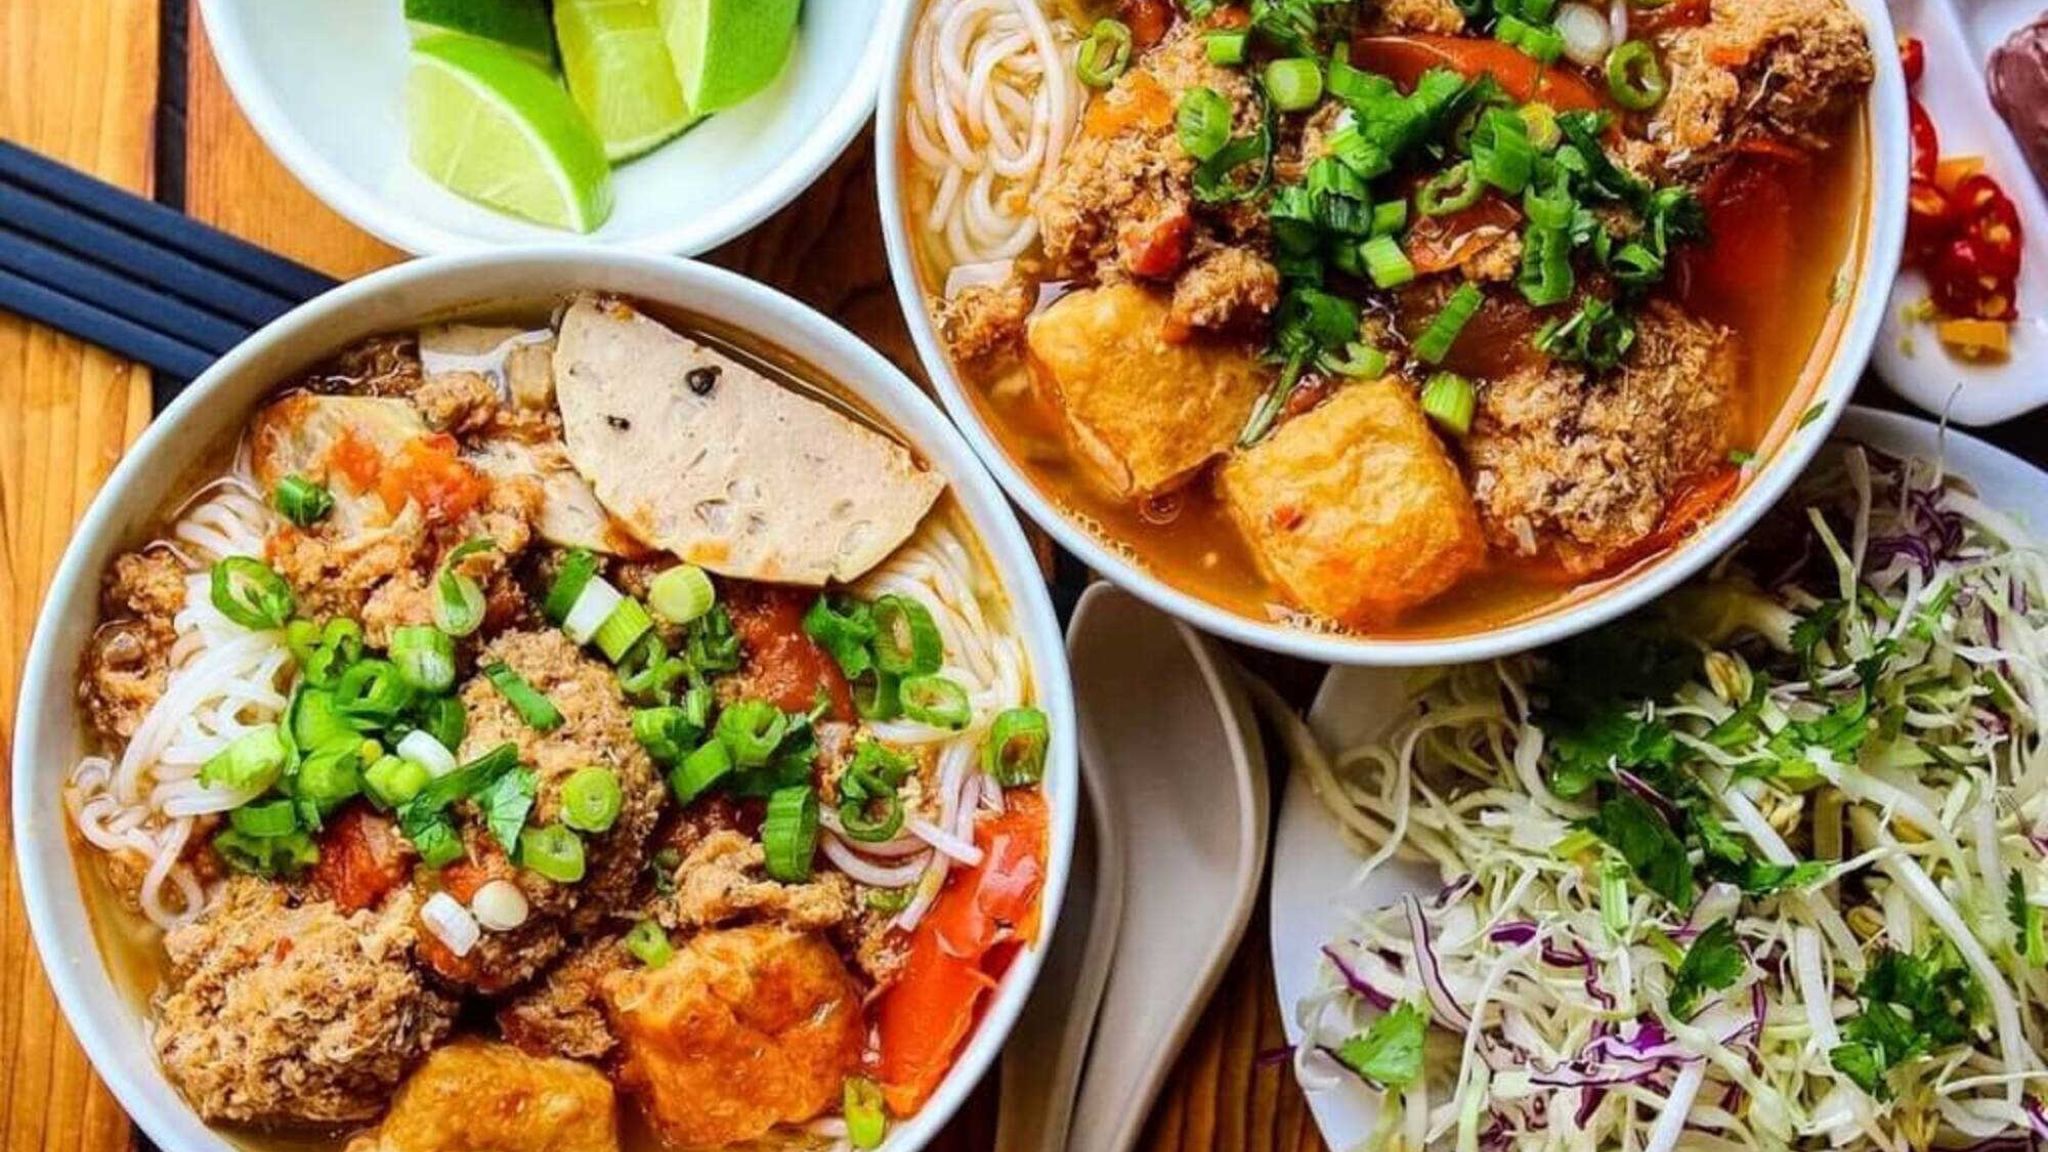 Bun Rieu One Of The Most Attractive Dish